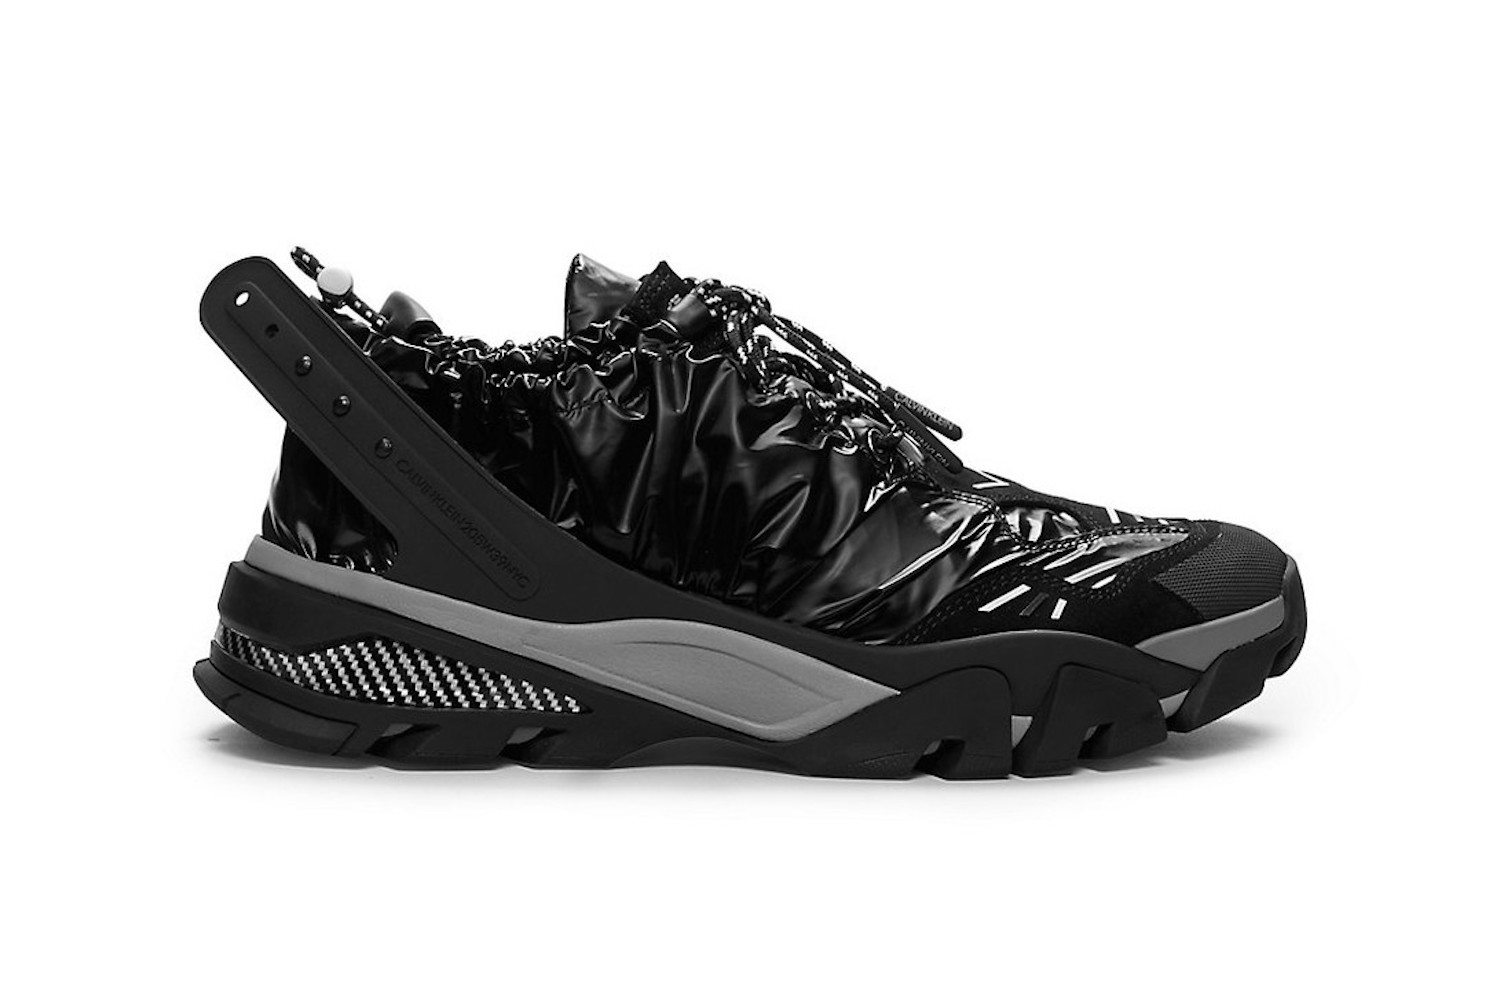 calvin klein drawcord athletic sneakers release date price info calvin klein 205w39nyc